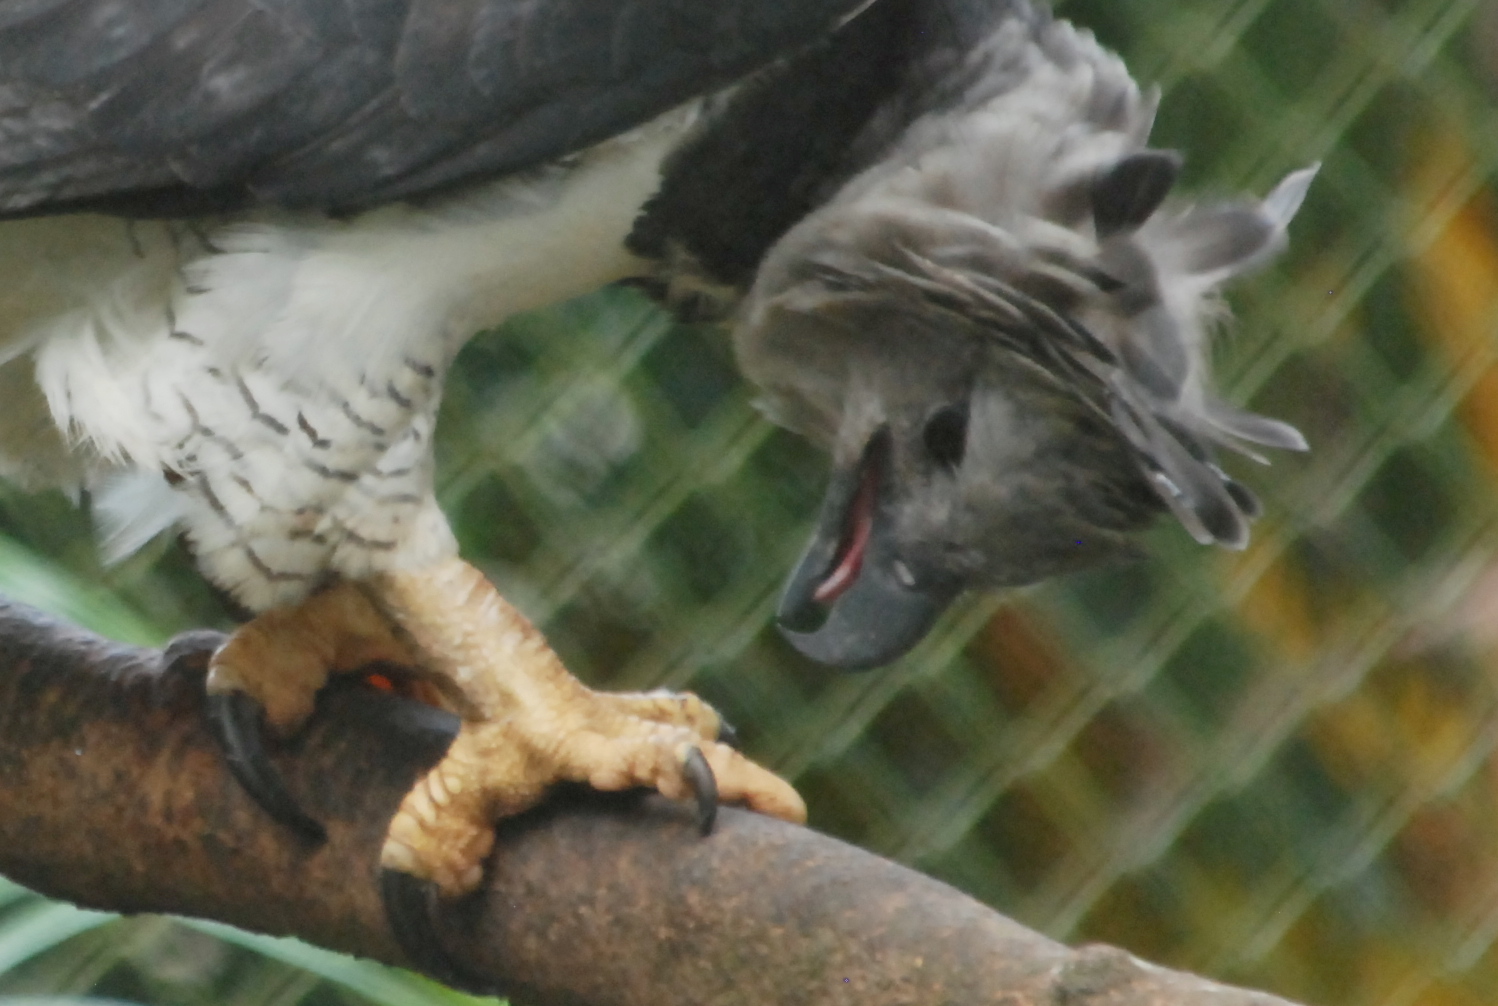 Click picture to see more Harpy Eagles.